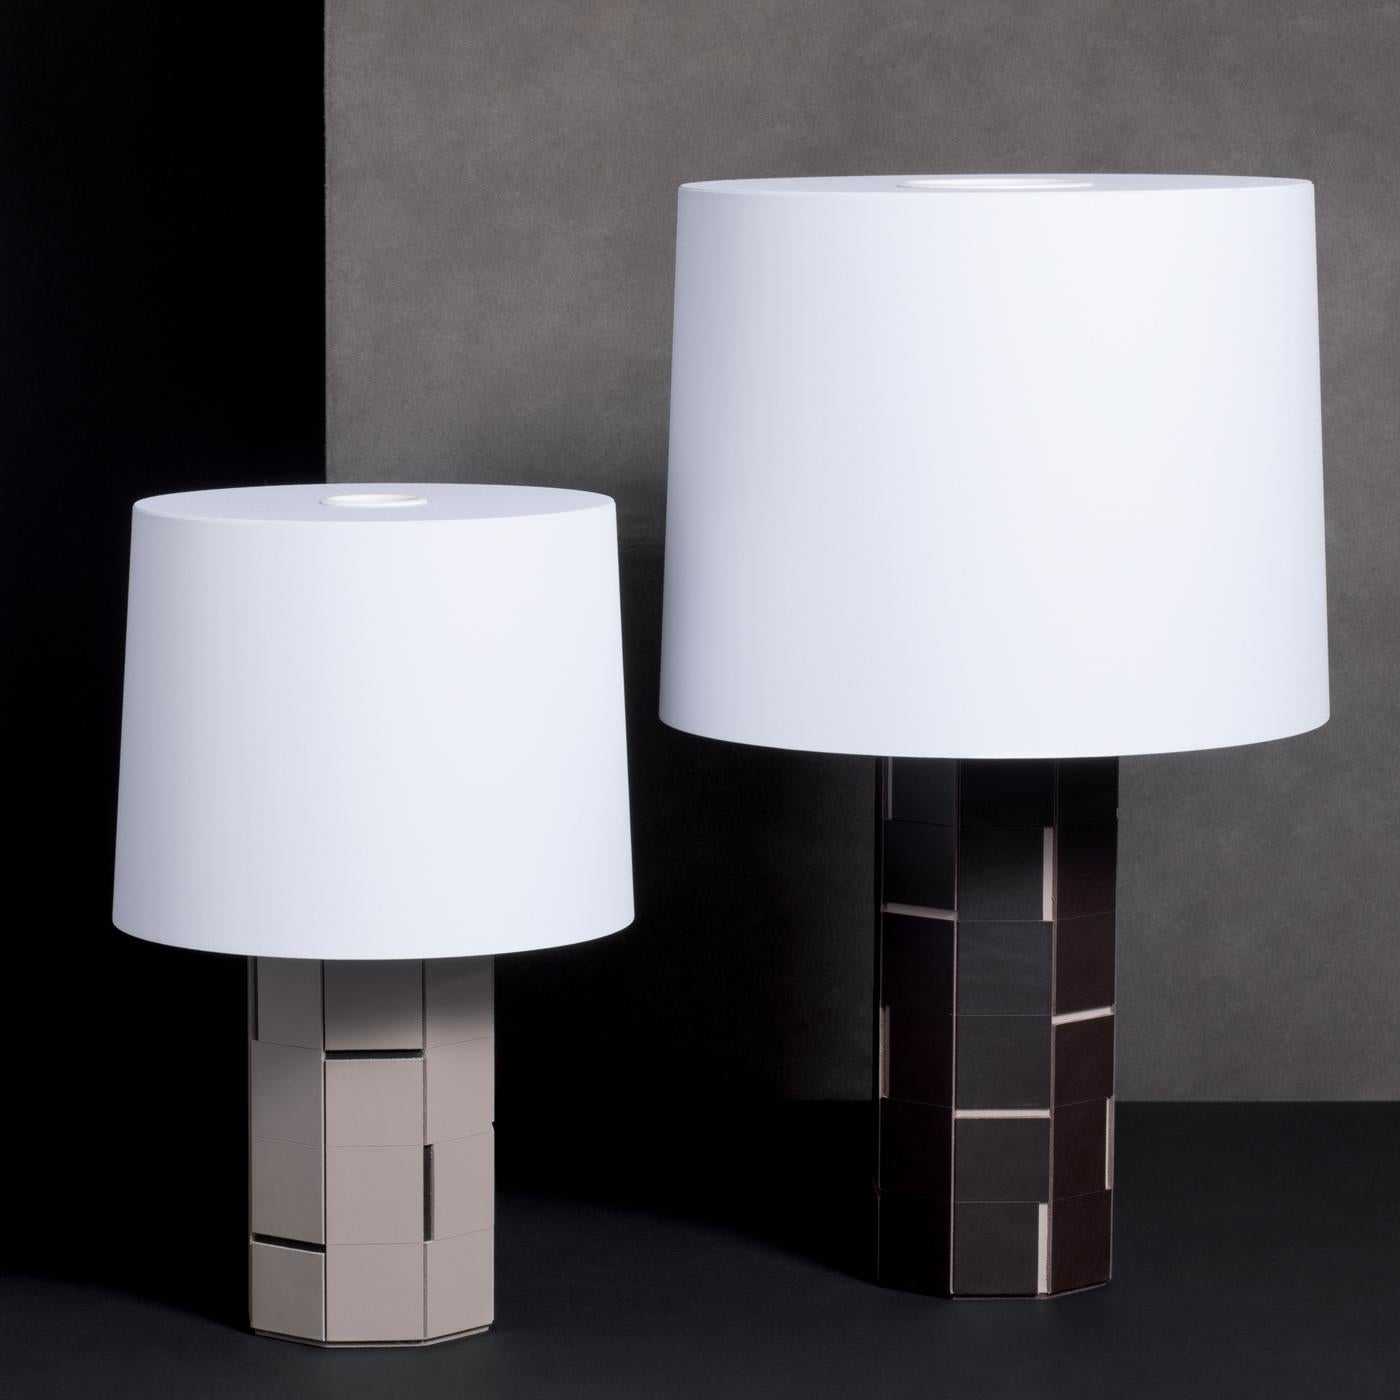 This unique table lamp, part of the Atari collection, will look right at home with any style. It features a base made of saddle leather white tiles with black grooves and a white shade that diffuses a soft light. The overall effect is of textural